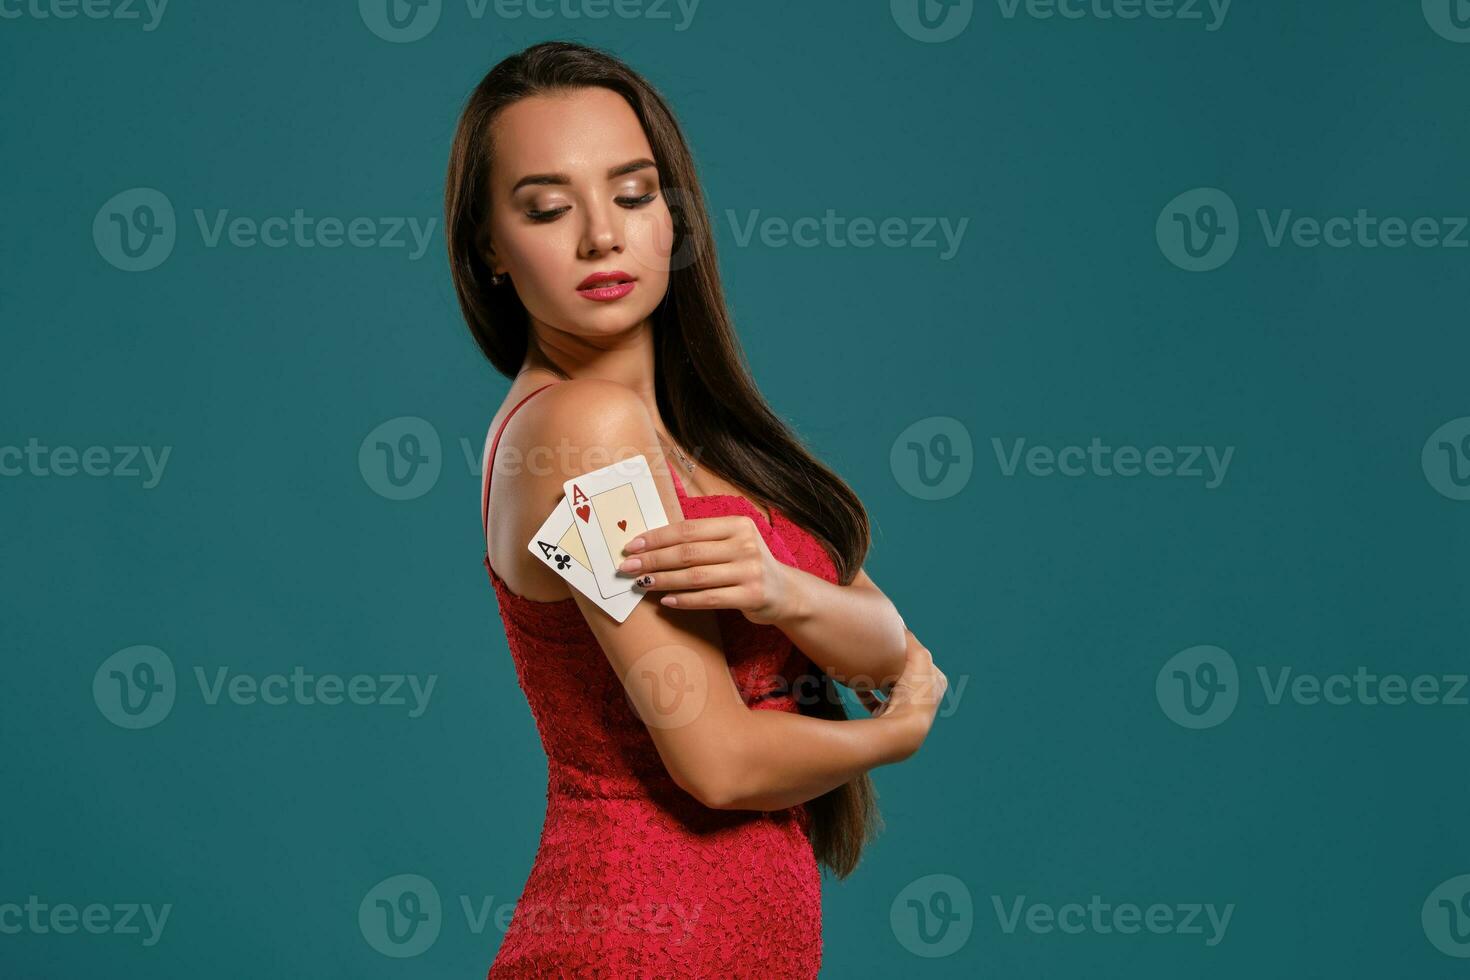 Brunette girl with a long hair, wearing a sexy red dress is posing holding two playing cards in her hand, blue background. photo